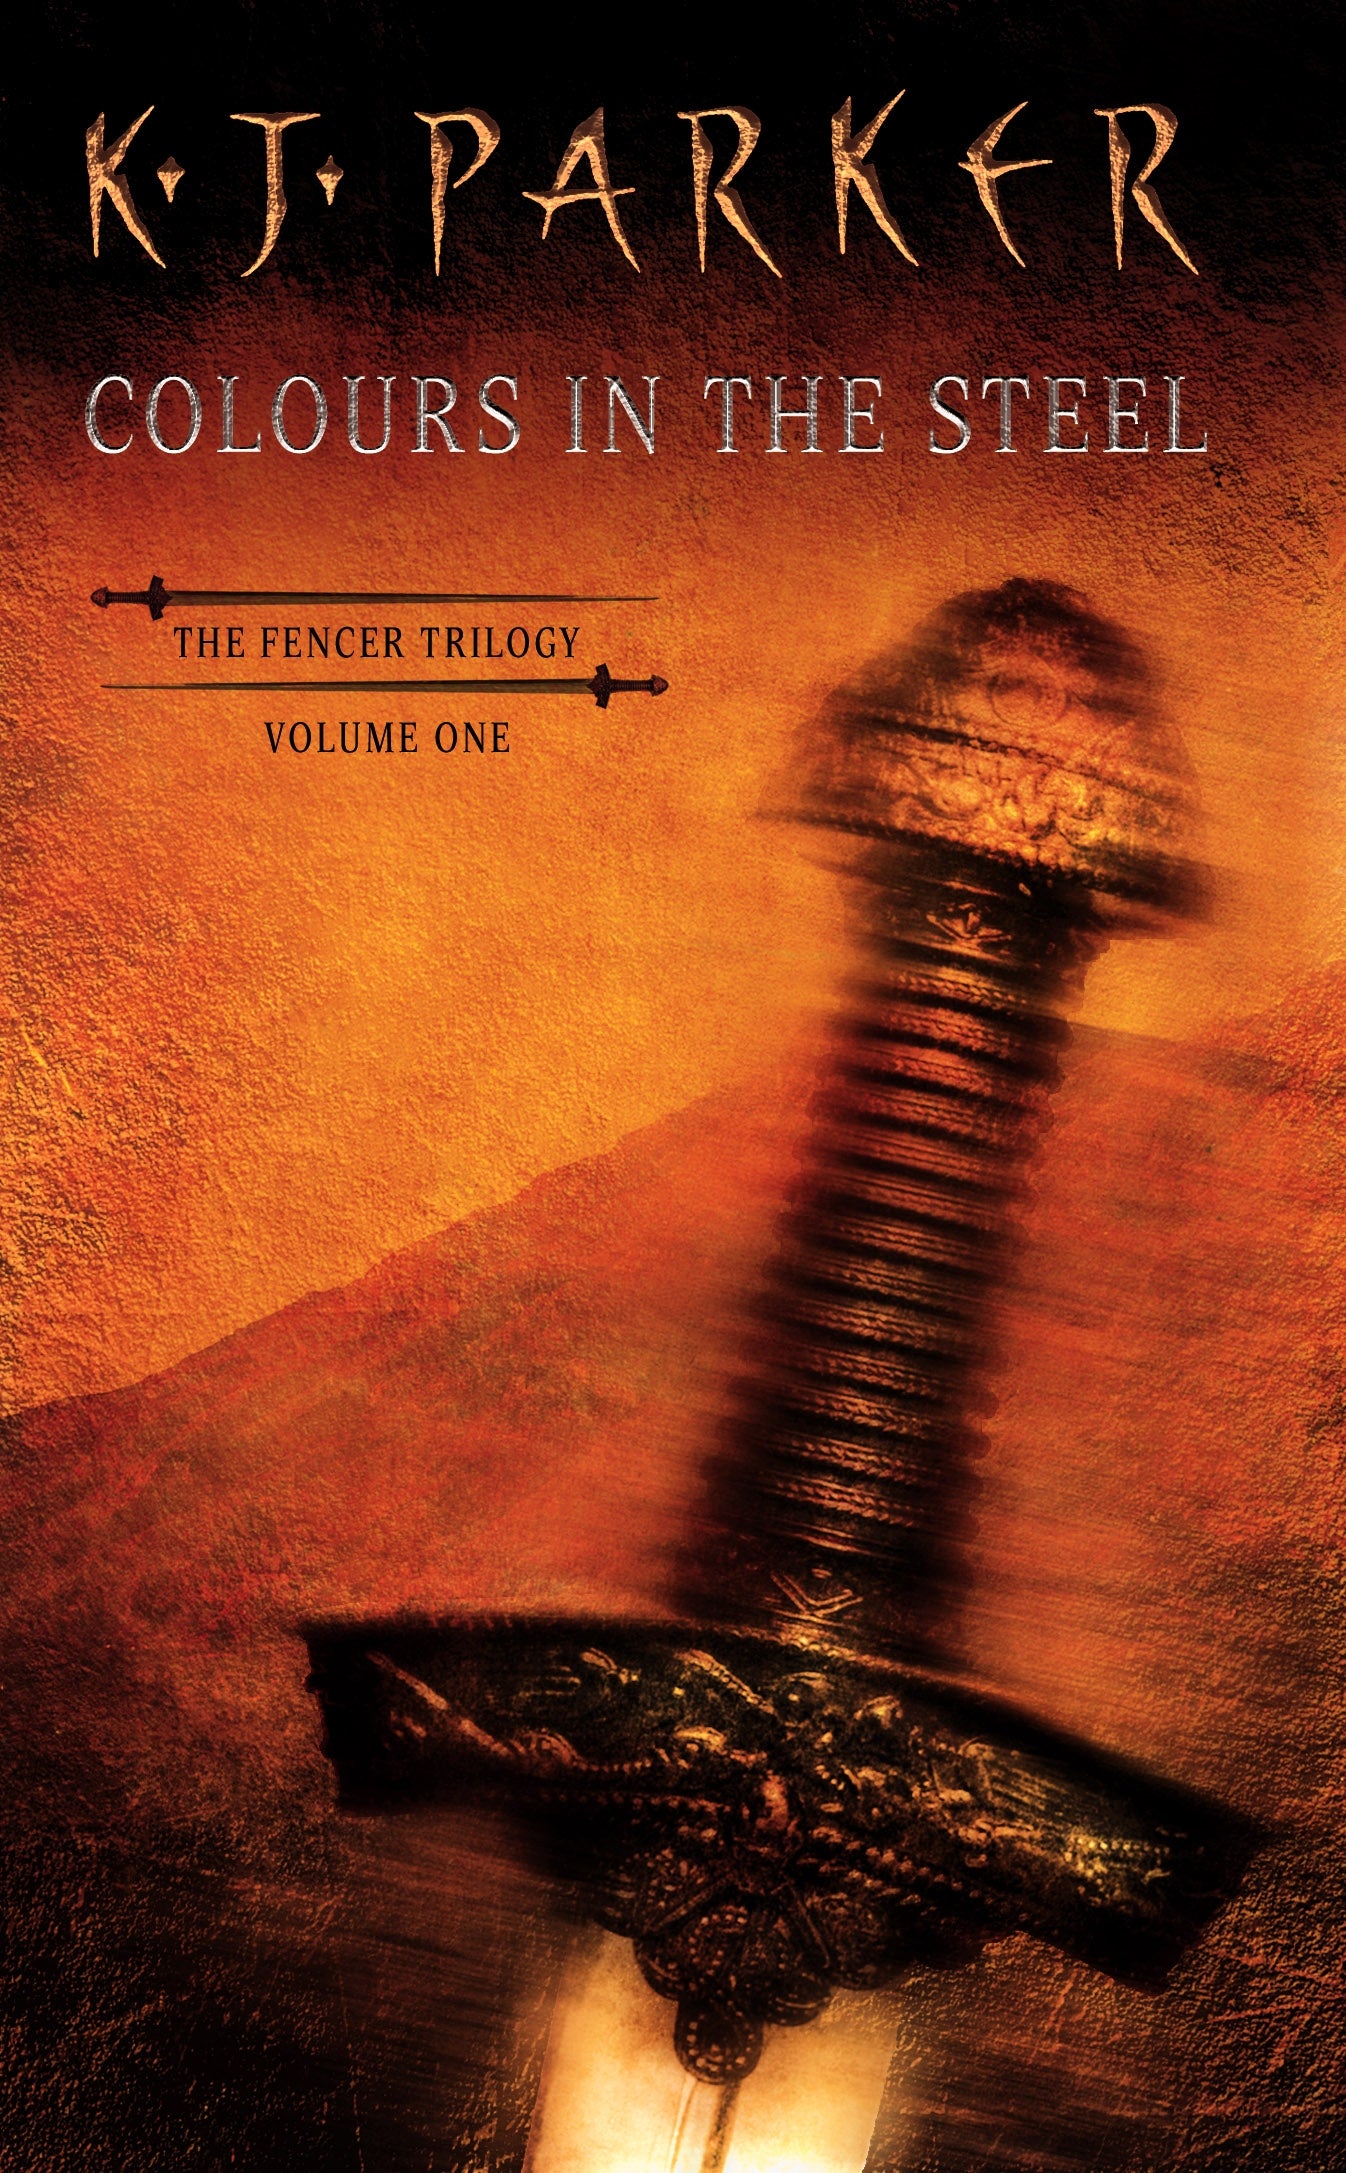 Colours In The Steel by K. J. Parker